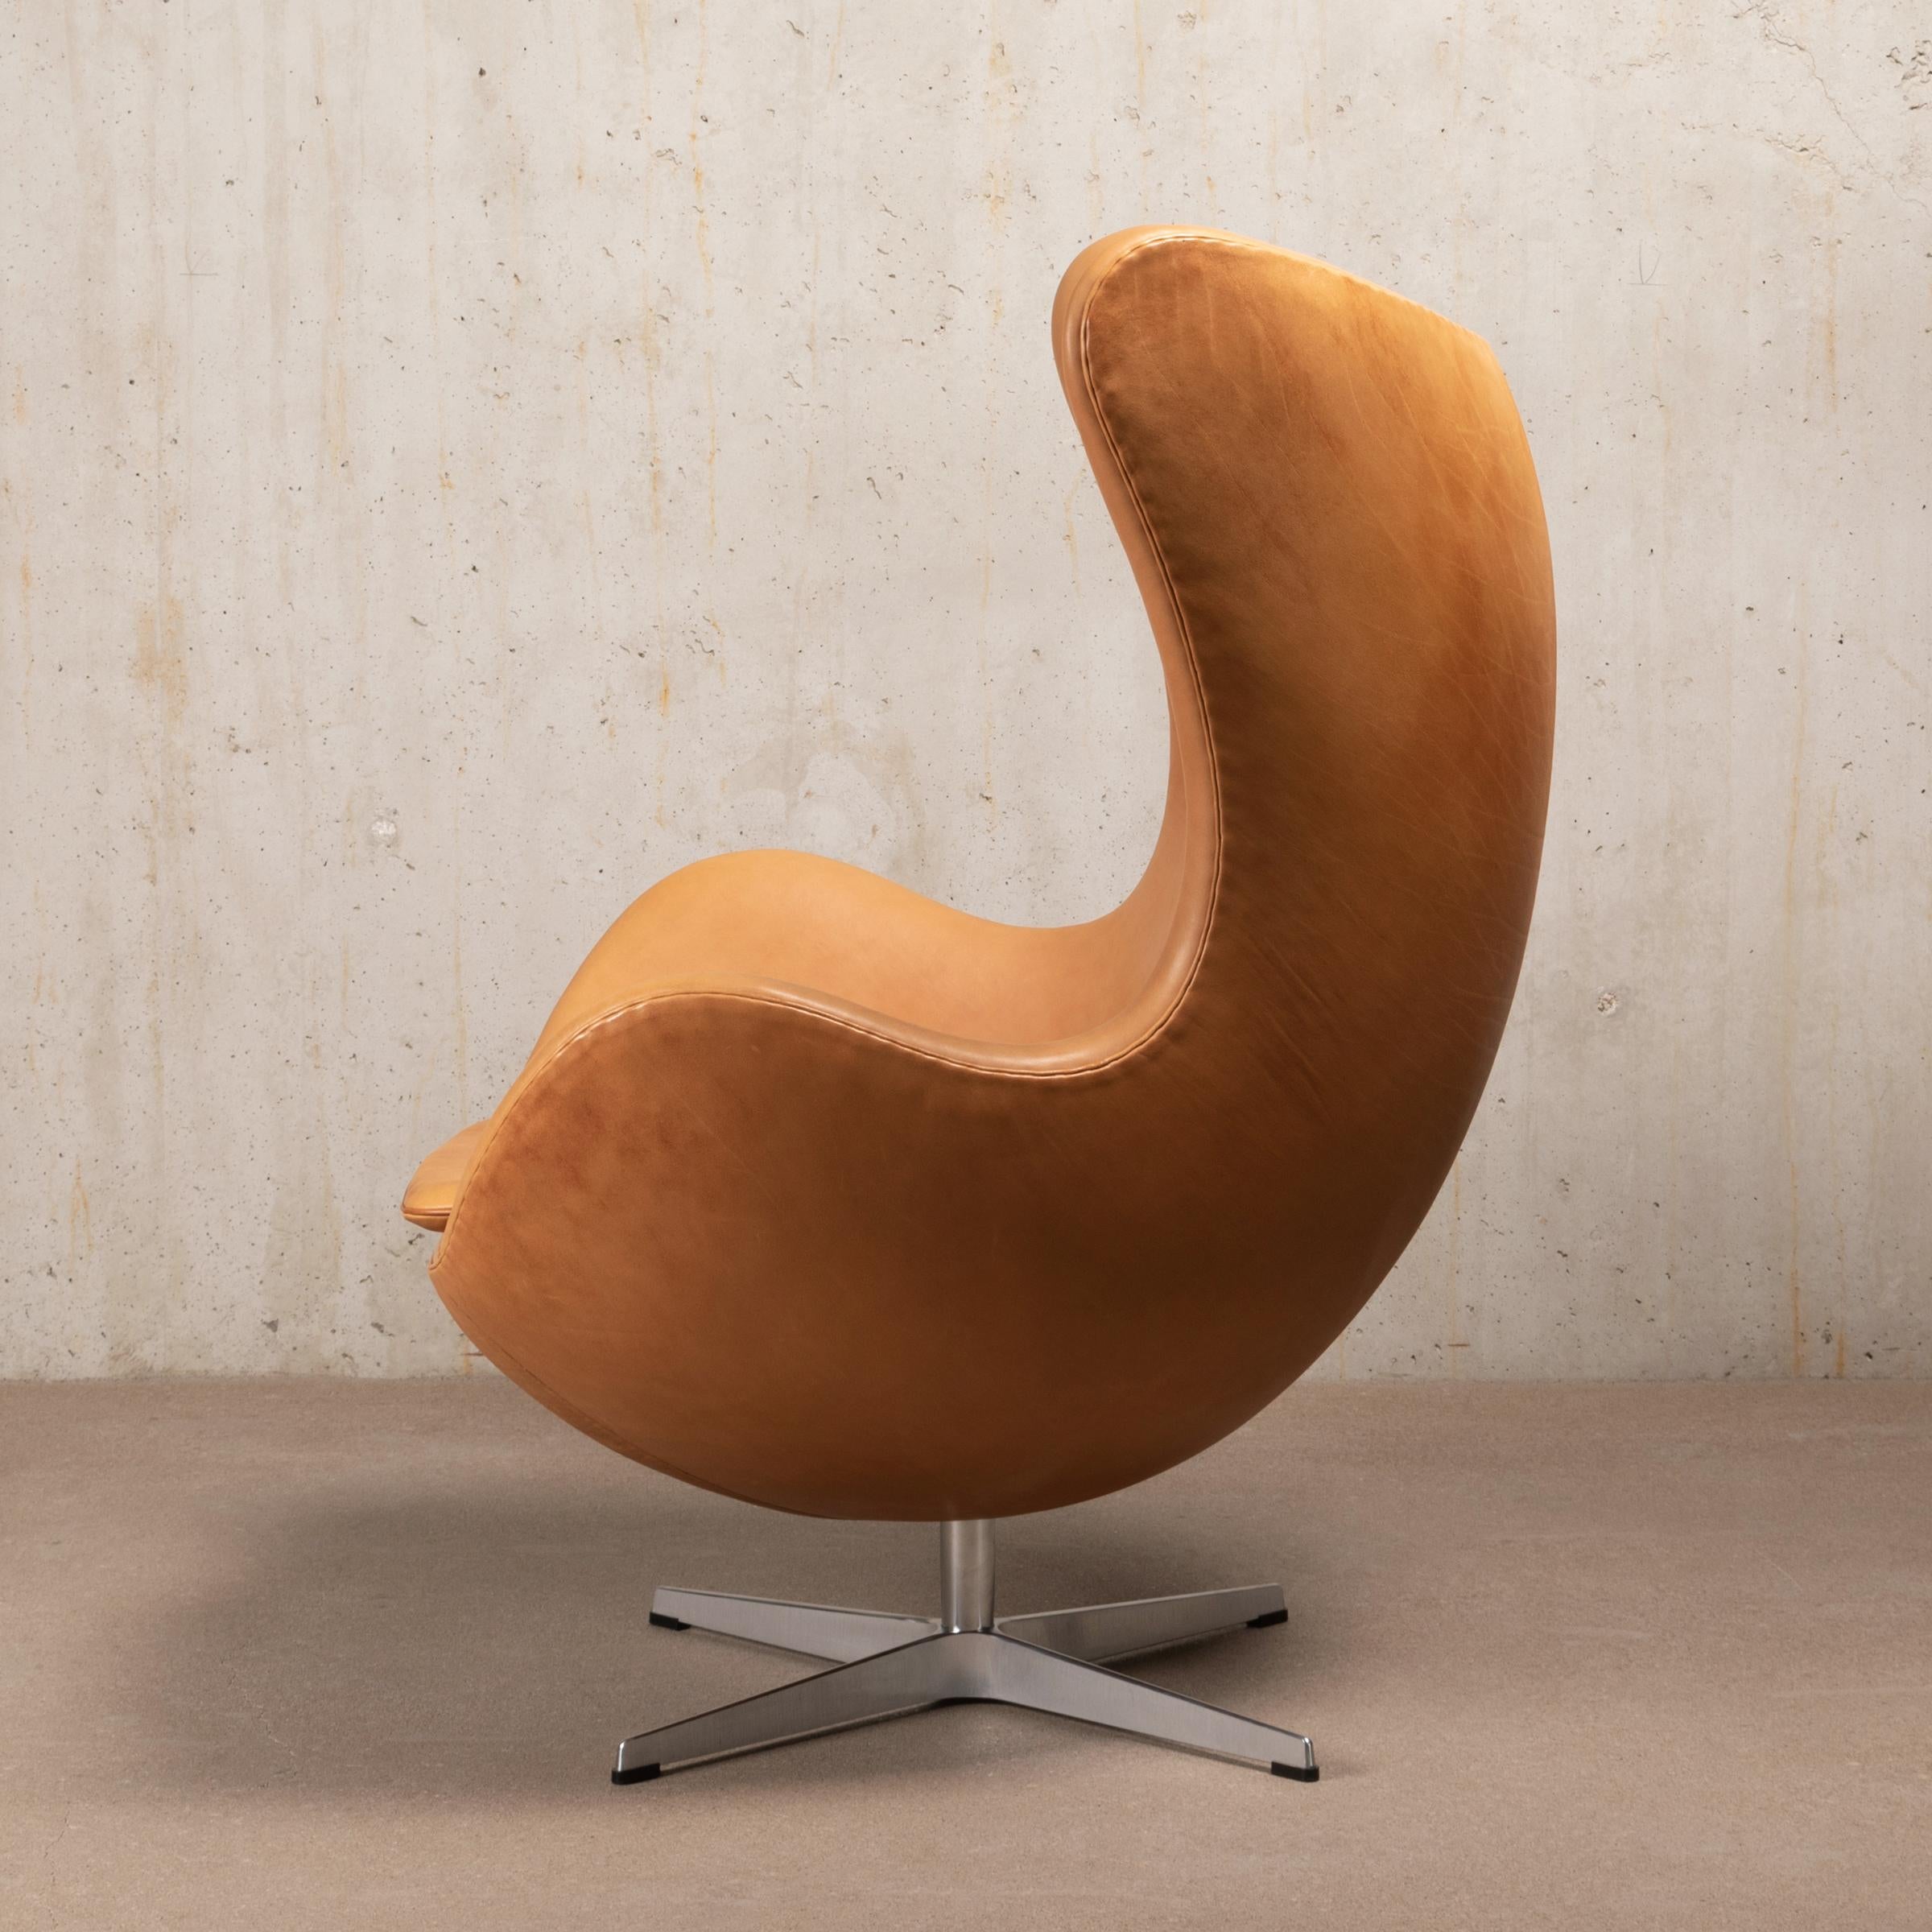 Iconic and beautifull Egg chair designed by Arne Jacobsen for Fitz Hansen in 1958. Original patined Walnut Grace Leather with base in polisehed aluminum with swivel / adjustable tilt function. All in very good original condition. Chair is signed